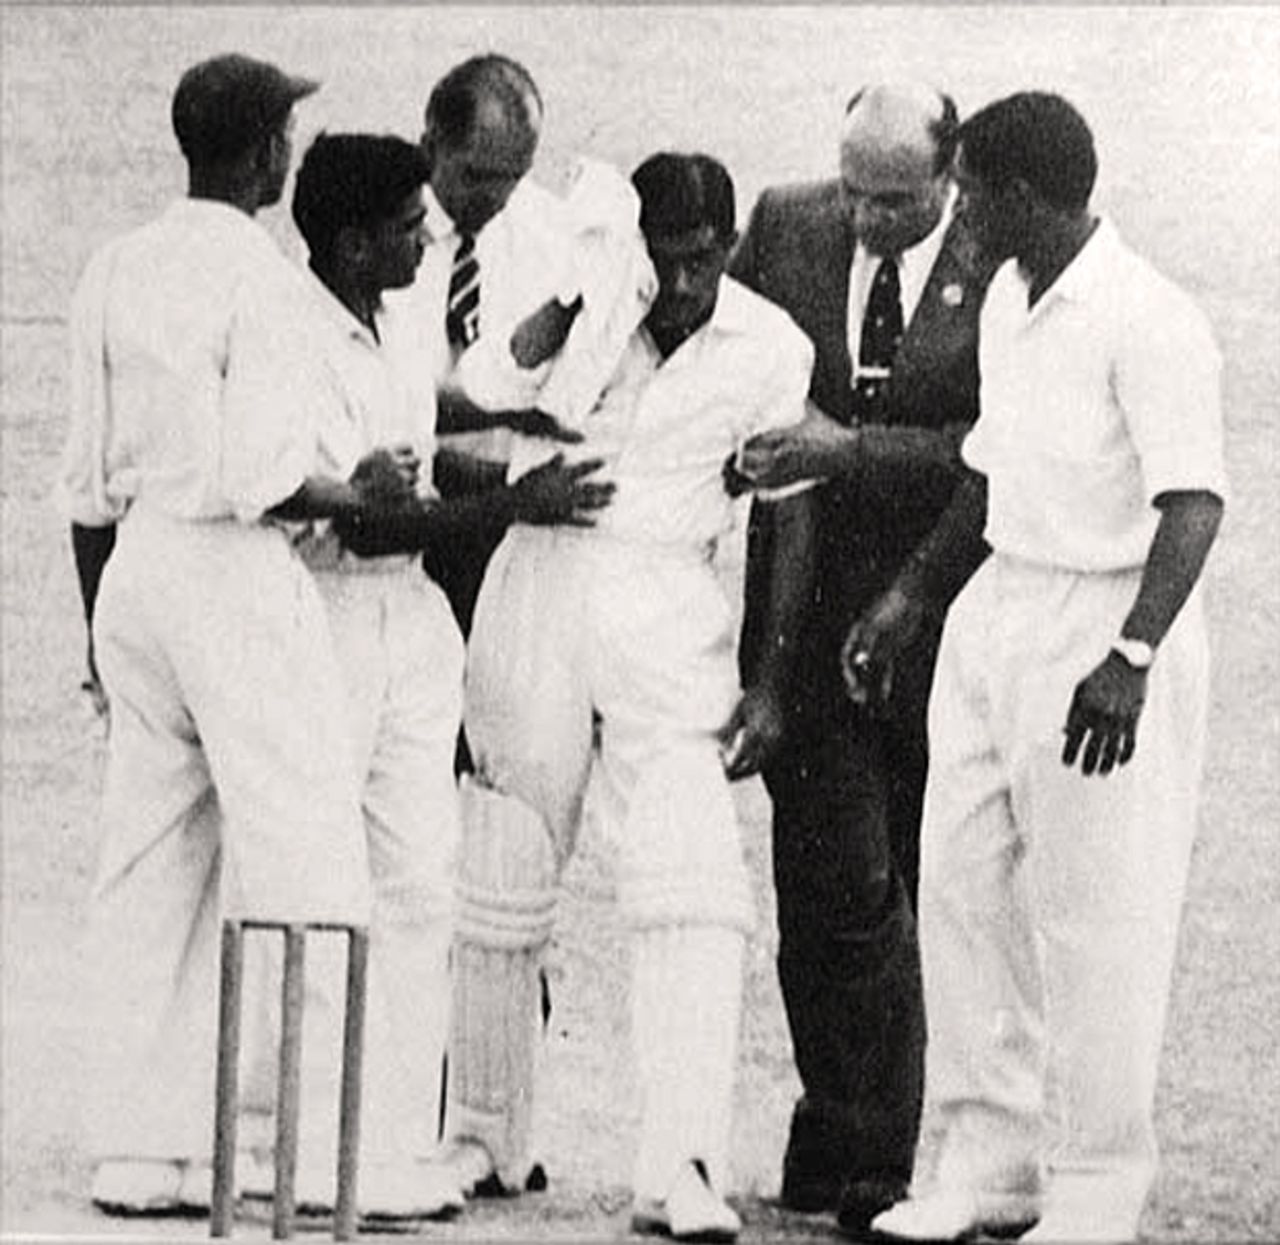 Nari Contractor is led off after being struck by Charlie Griffith, Barbados v Indians, March 17, 1962